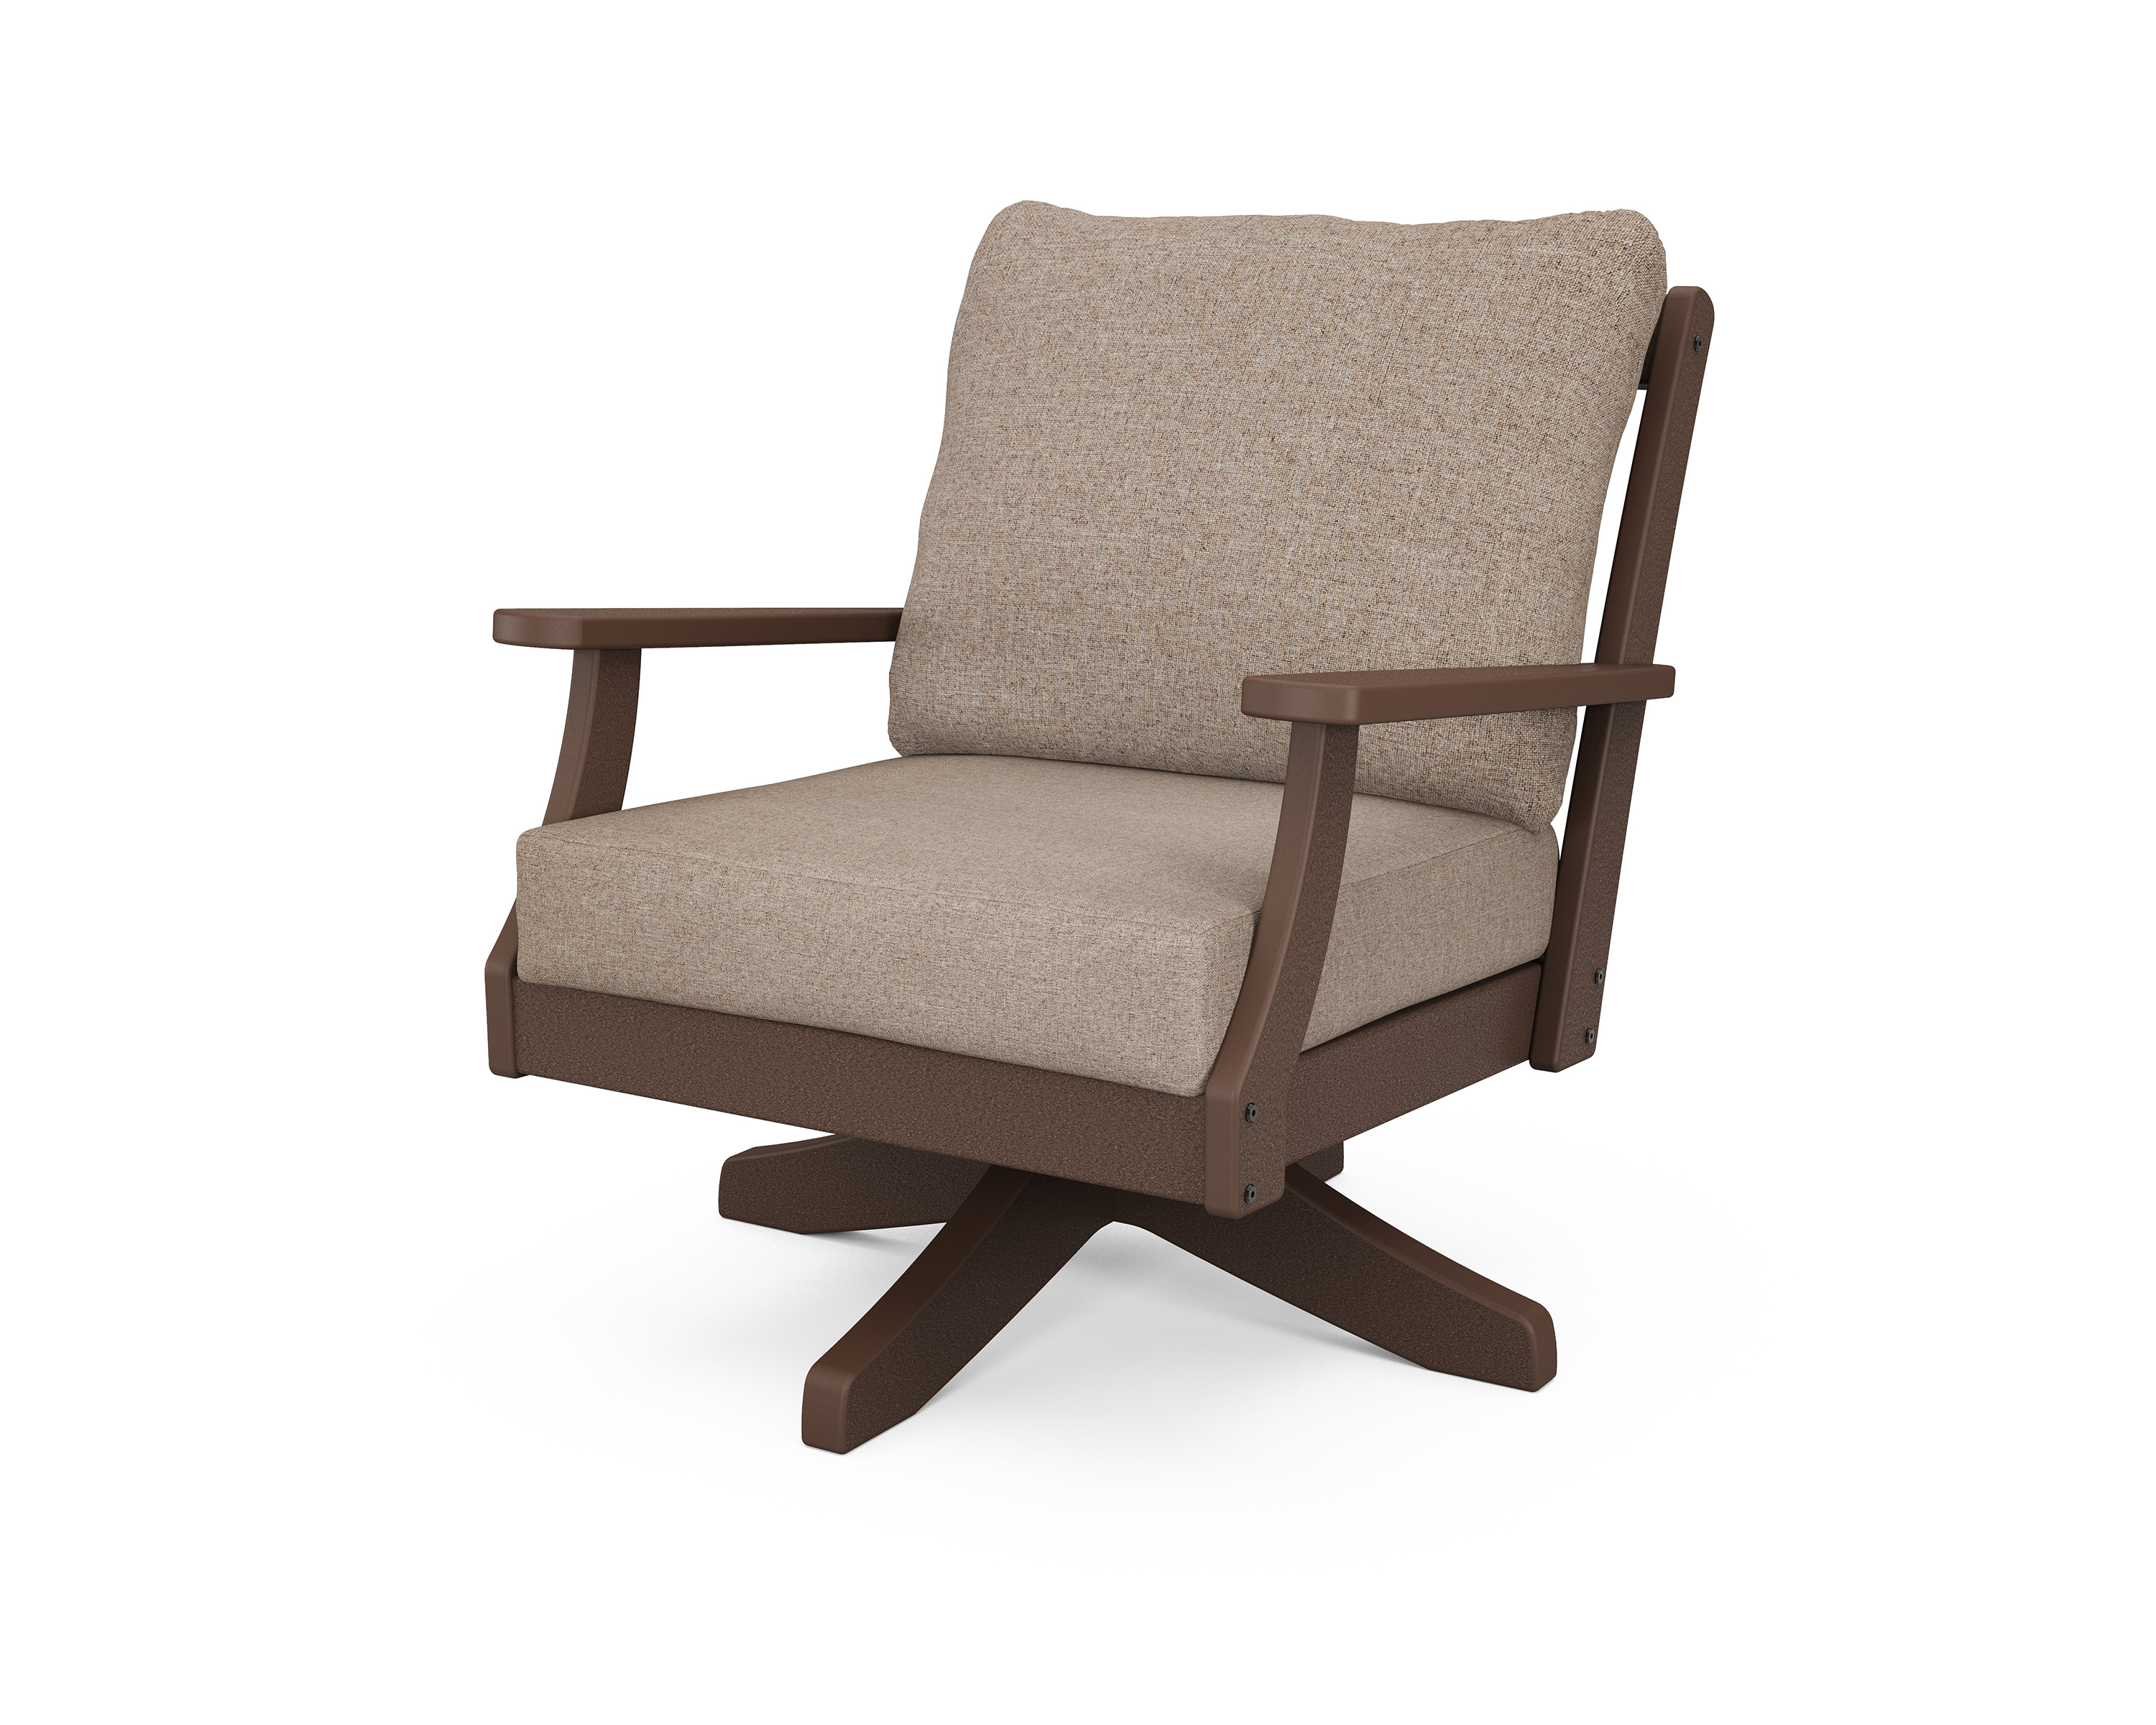 braxton deep seating swivel chair in mahogany / spiced burlap product image